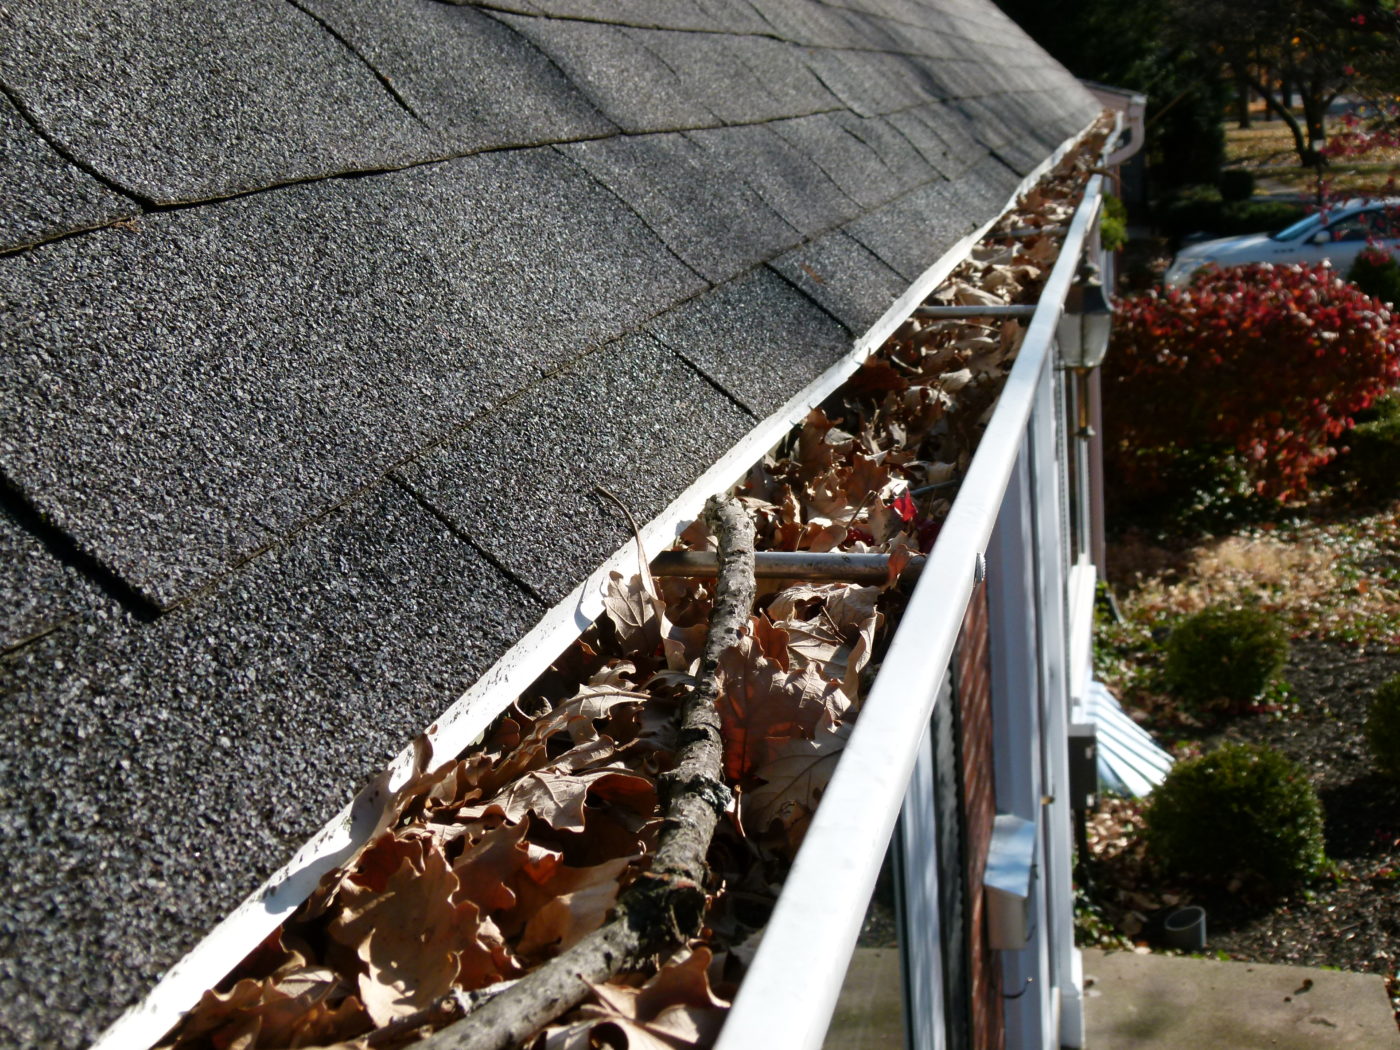 Gutter Clogged with Leaves